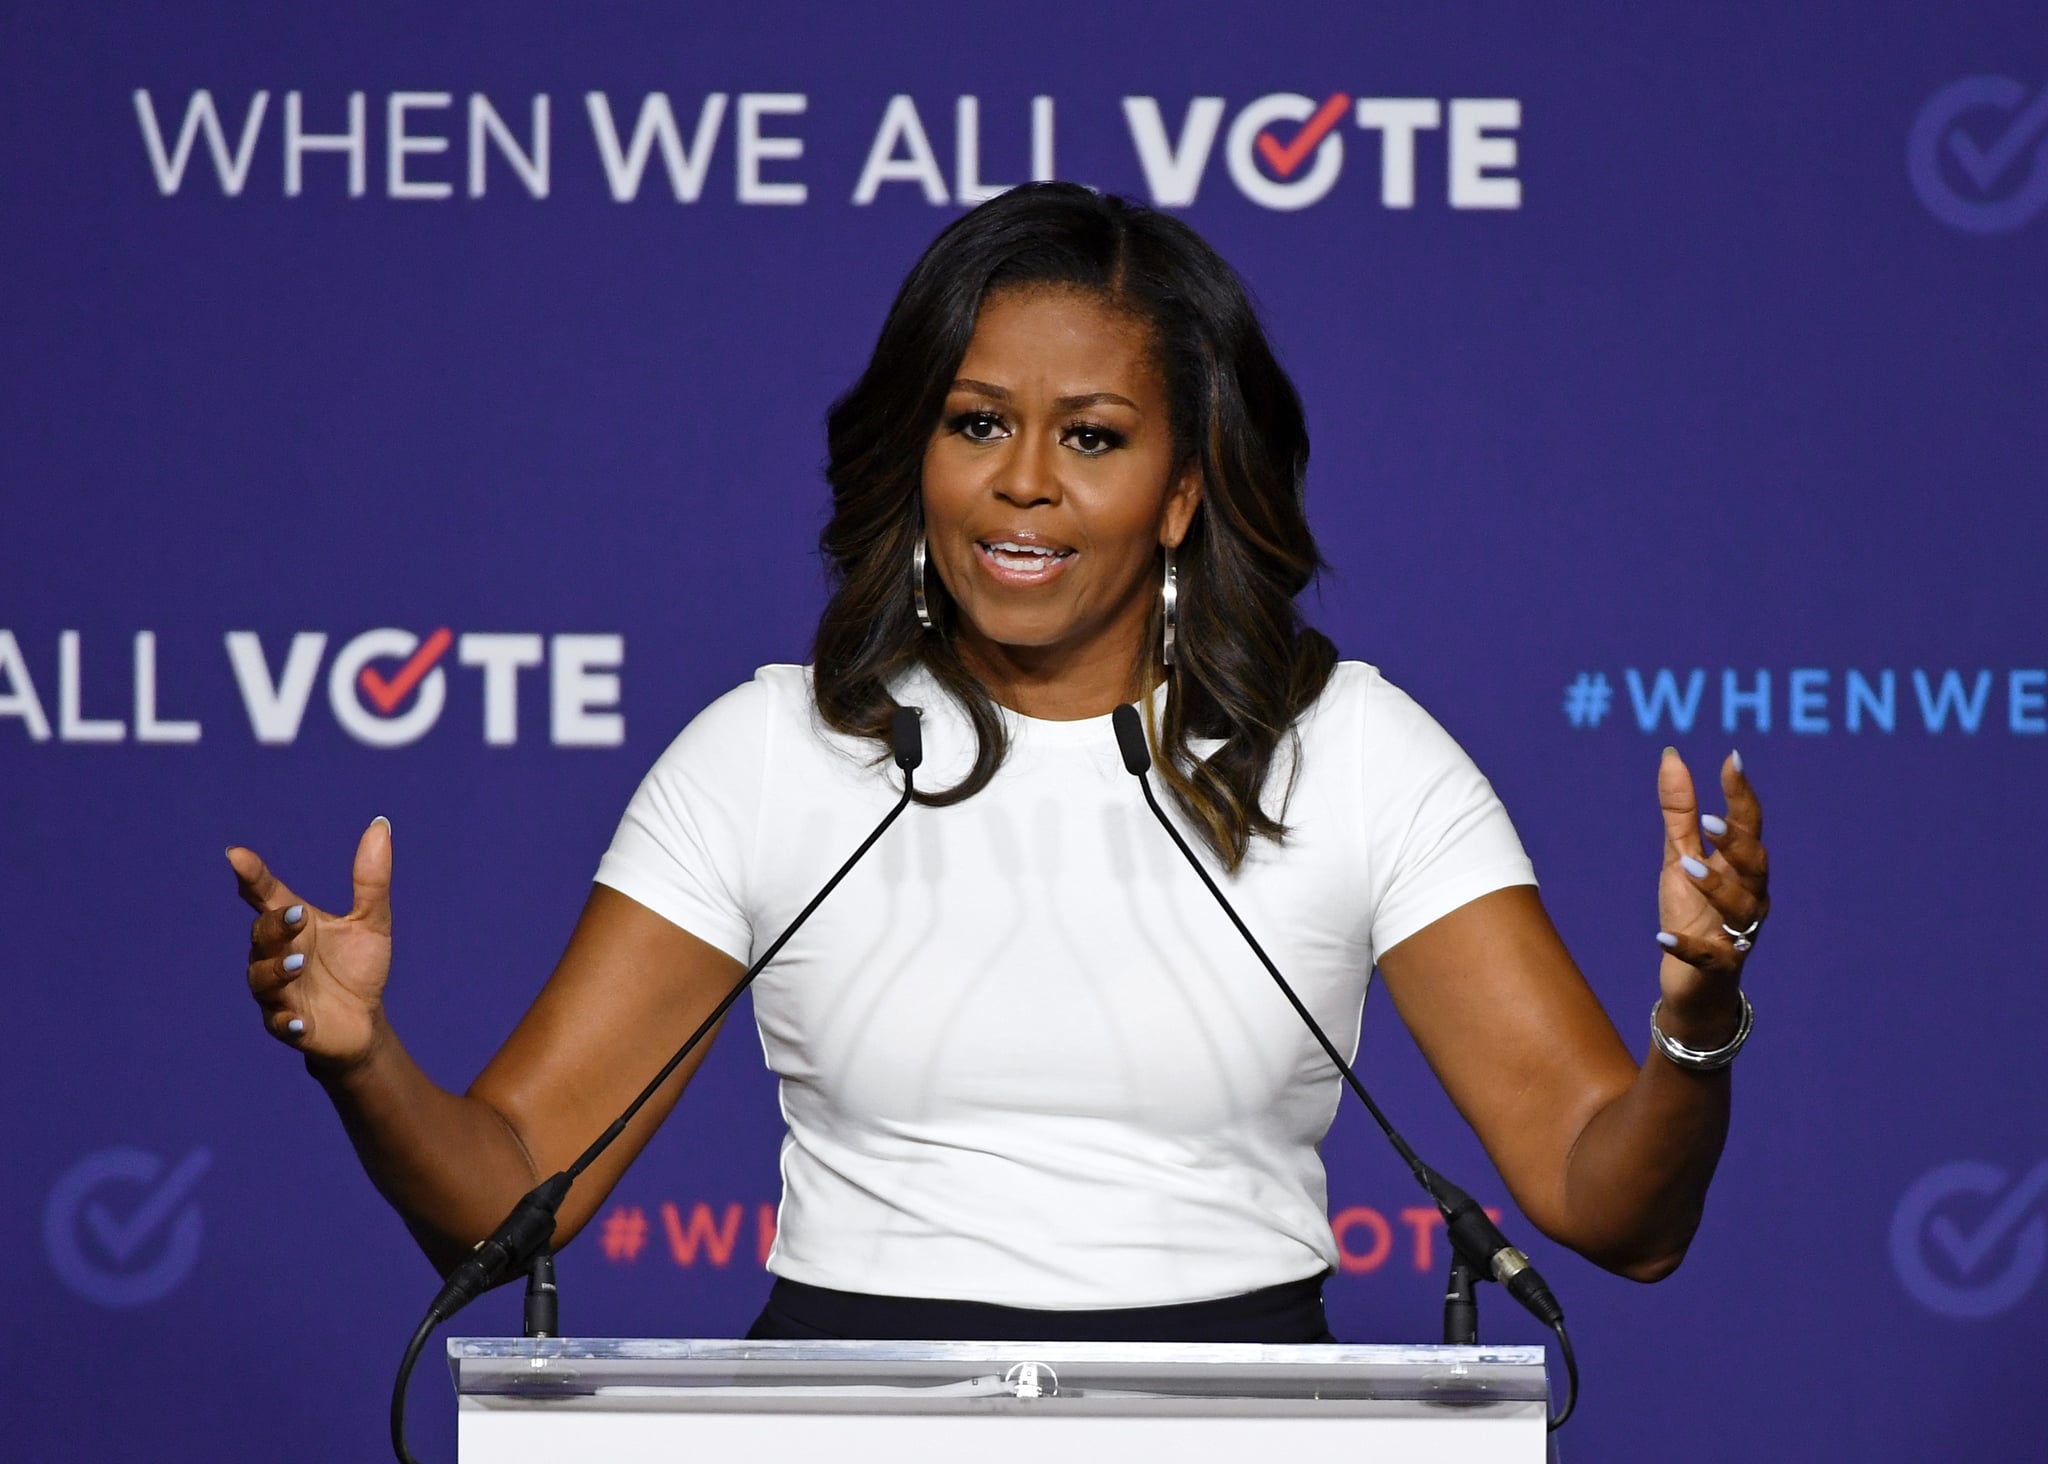 LAS VEGAS, NV - SEPTEMBER 23:  Former first lady Michelle Obama speaks during a rally for When We All Vote's National Week of Action at Chaparral High School on September 23, 2018 in Las Vegas, Nevada. Obama is the founder and a co-chairwoman of the organization that aims to help people register and to vote. Early voting for the 2018 midterm elections in Nevada begins on October 20.  (Photo by Ethan Miller/Getty Images)